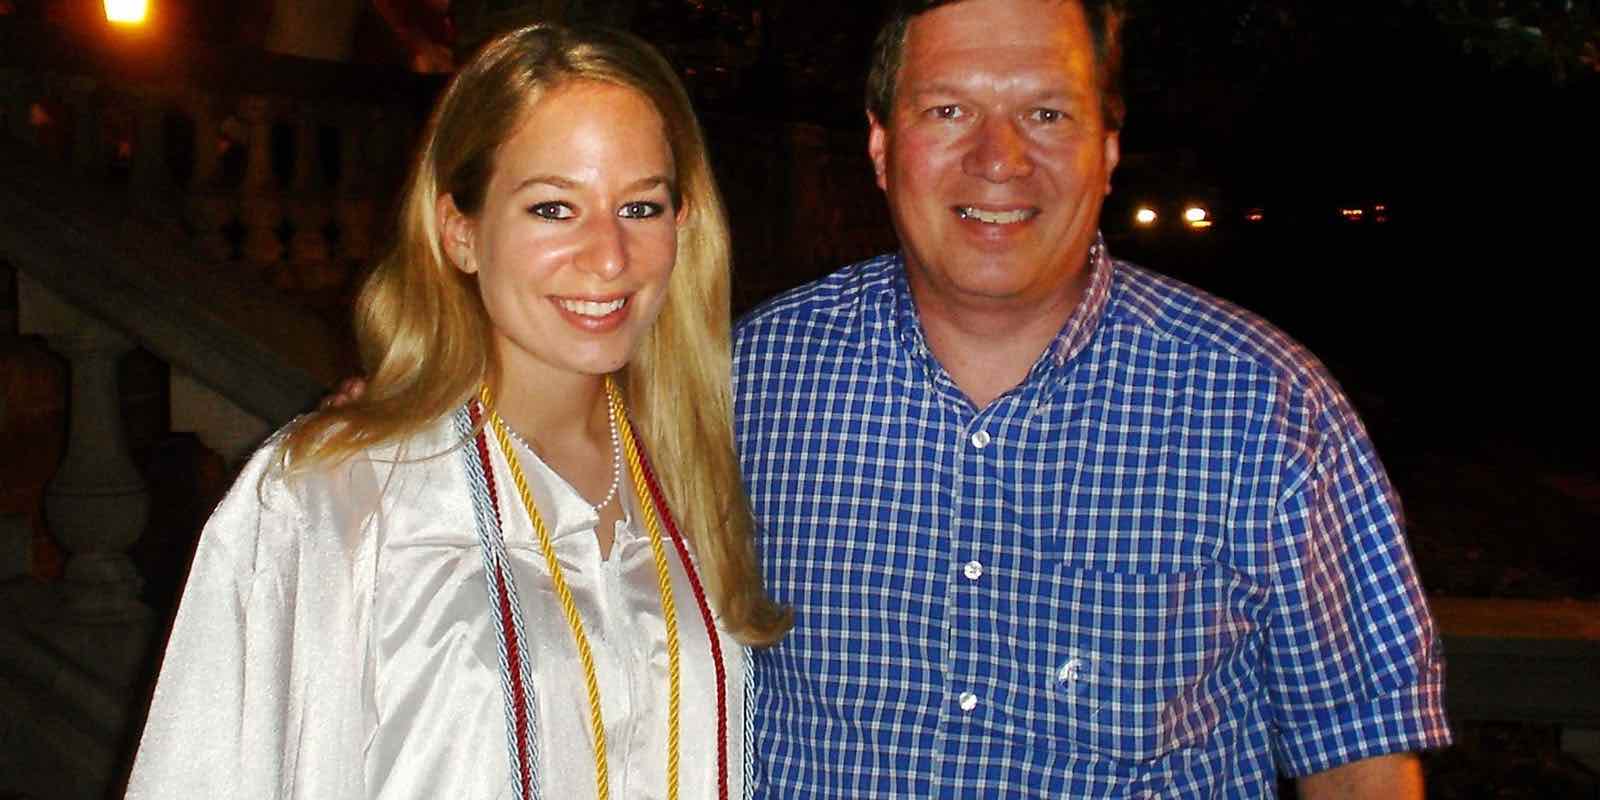 Natalee Holloway S Mother On Her Nearly 15 Year Journey To Find